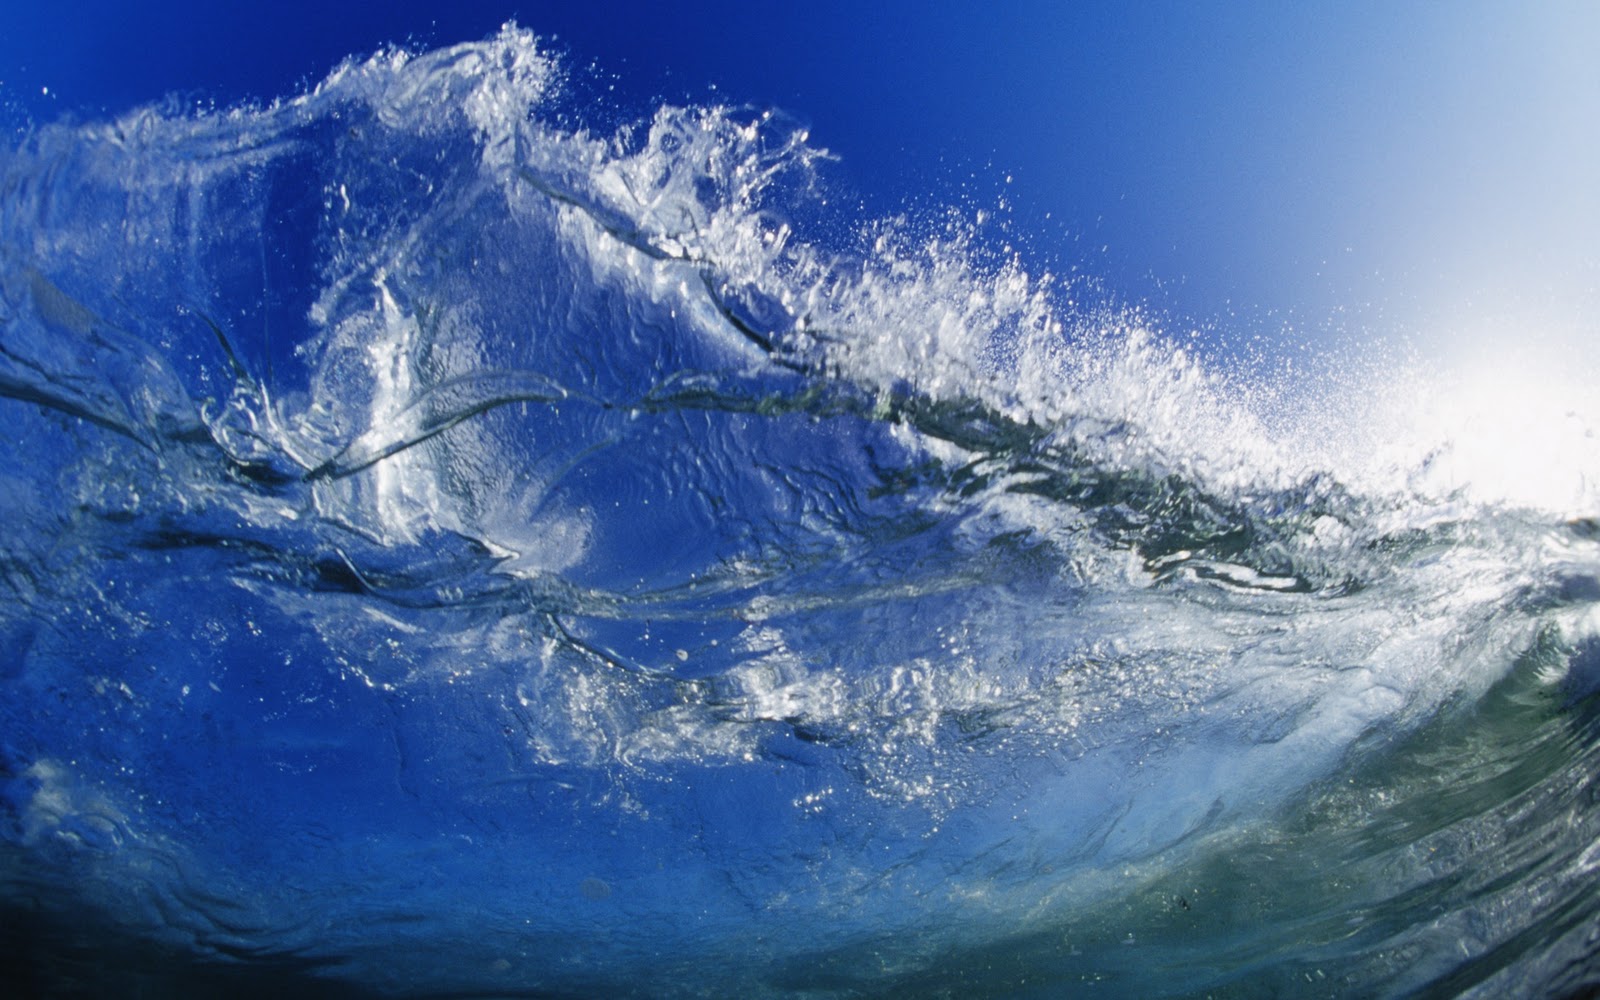 Free HD Wallpaper Surfing Wallpapers 1920x1200